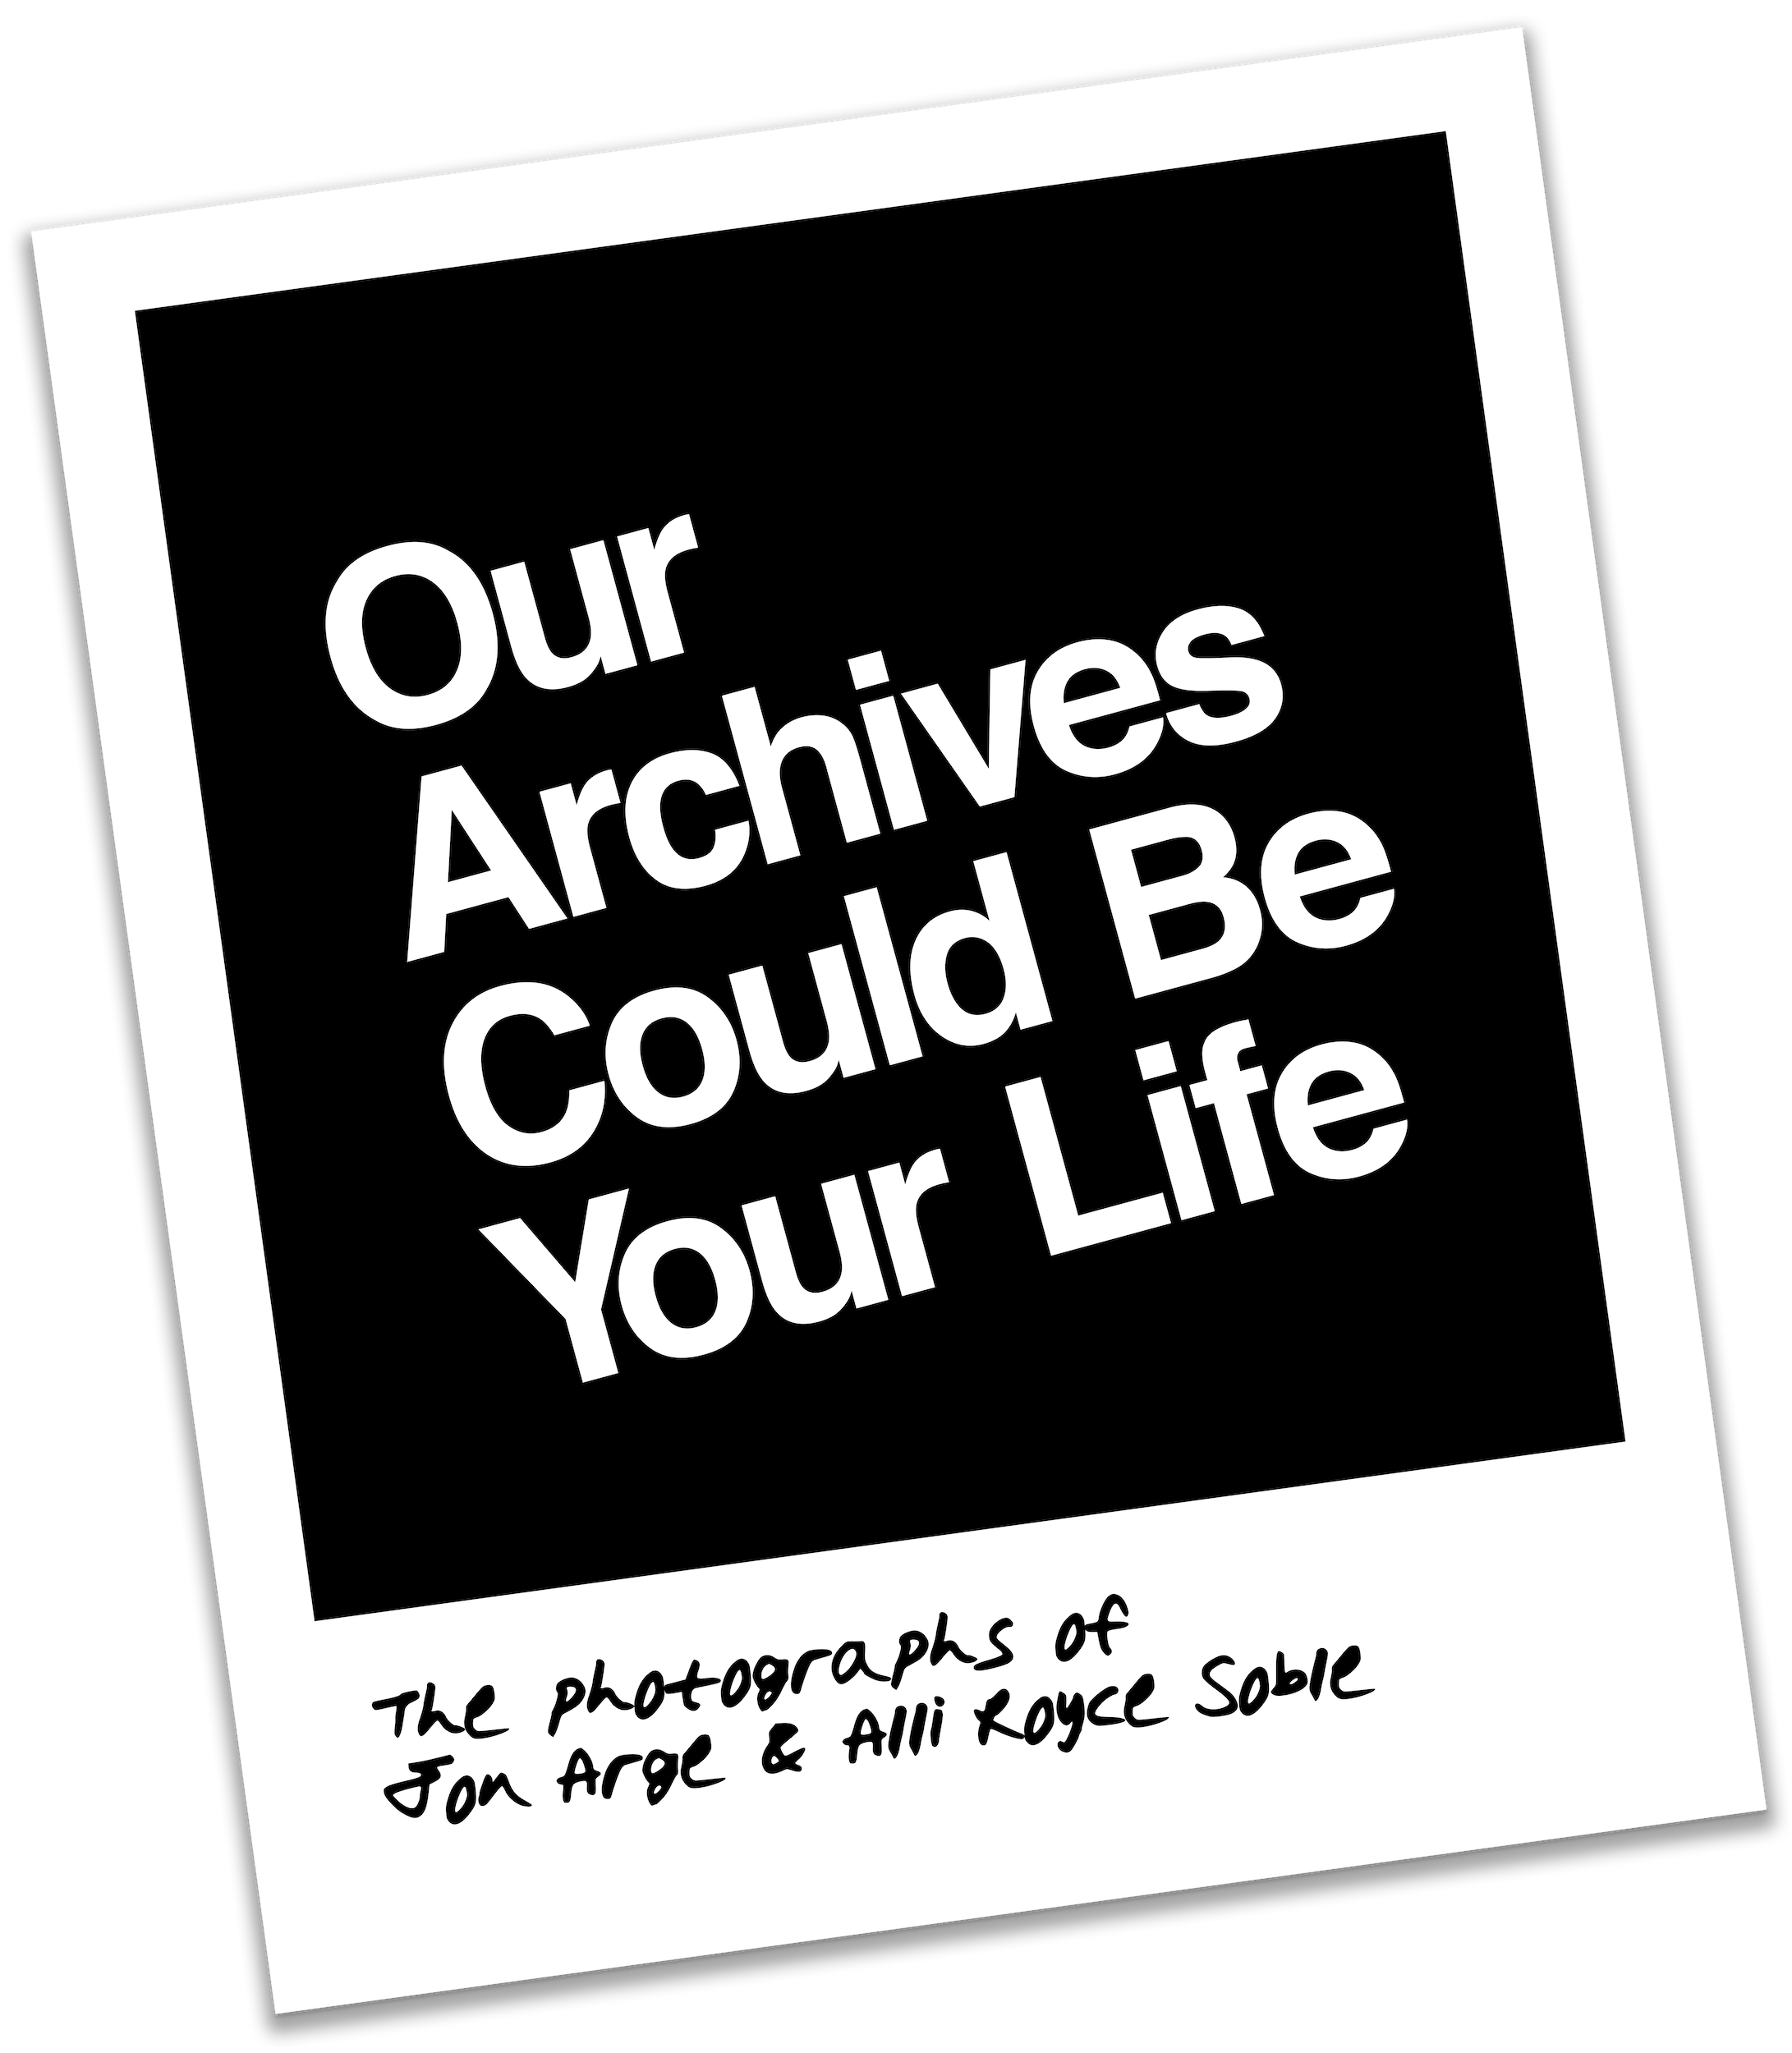 Digital Polaroid with "Our Archives Could Be Your Life" exhibit title